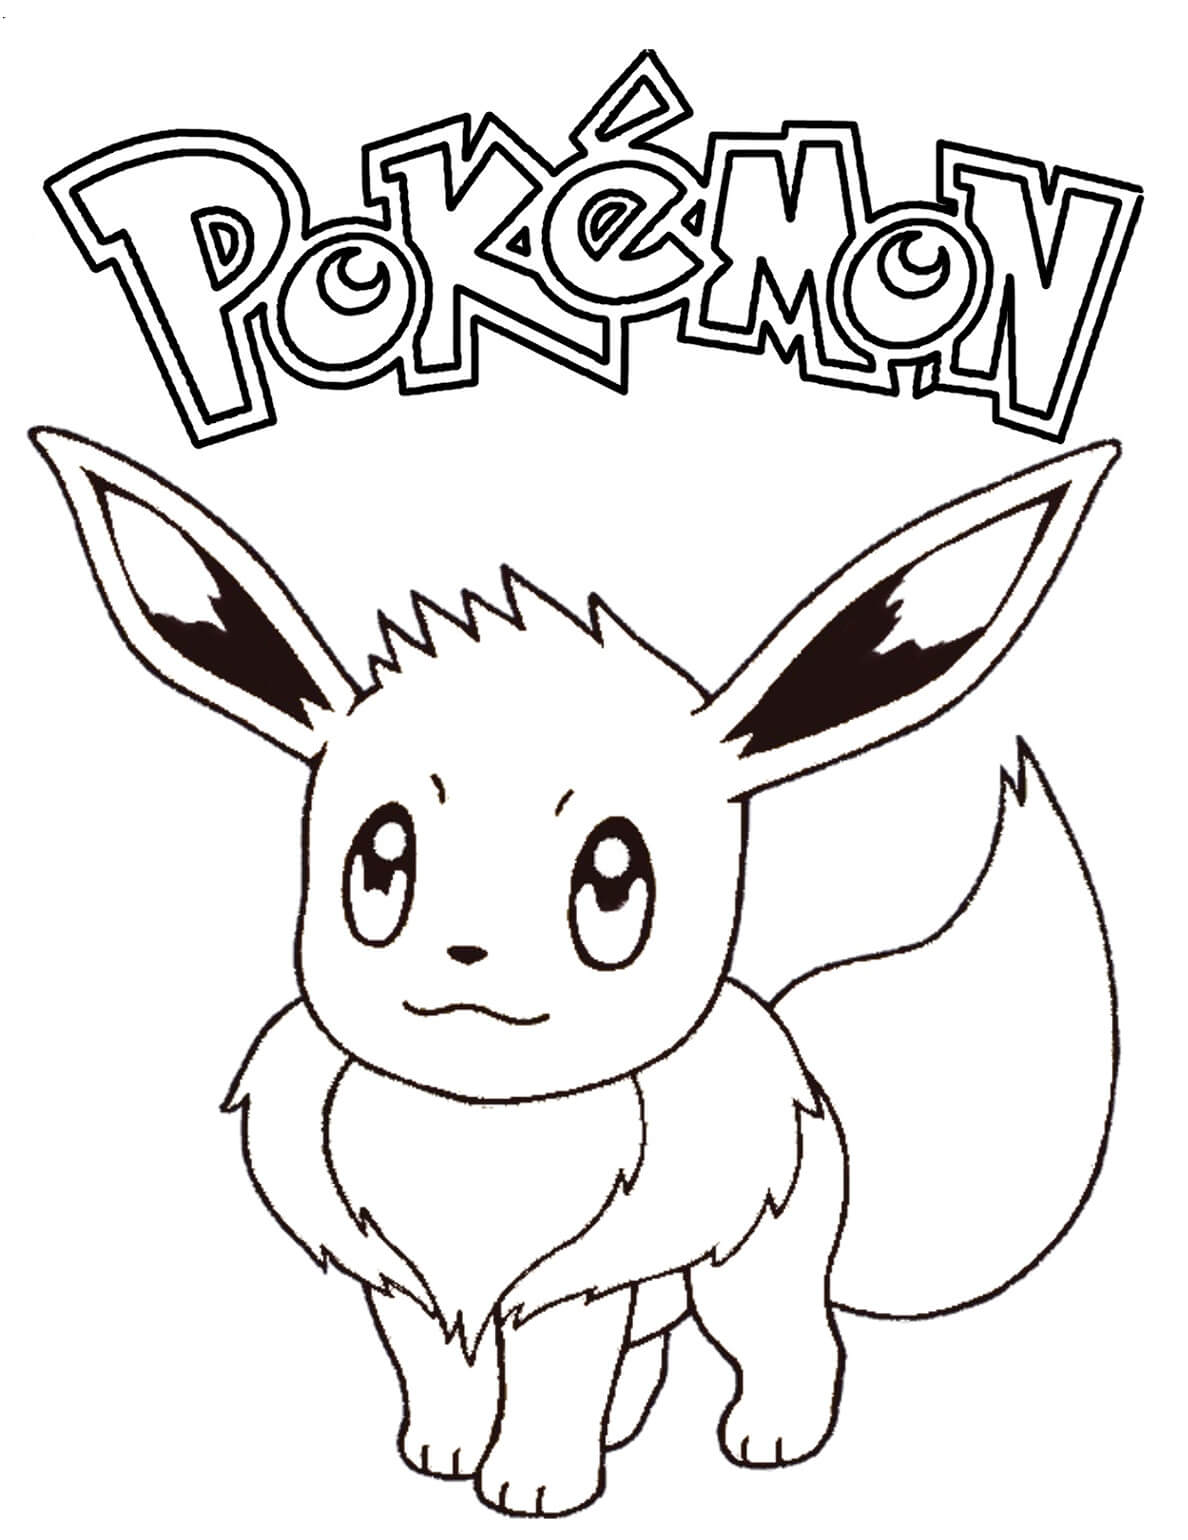 Eevee Pokemon Coloring Page   Free Printable Coloring Pages for Kids